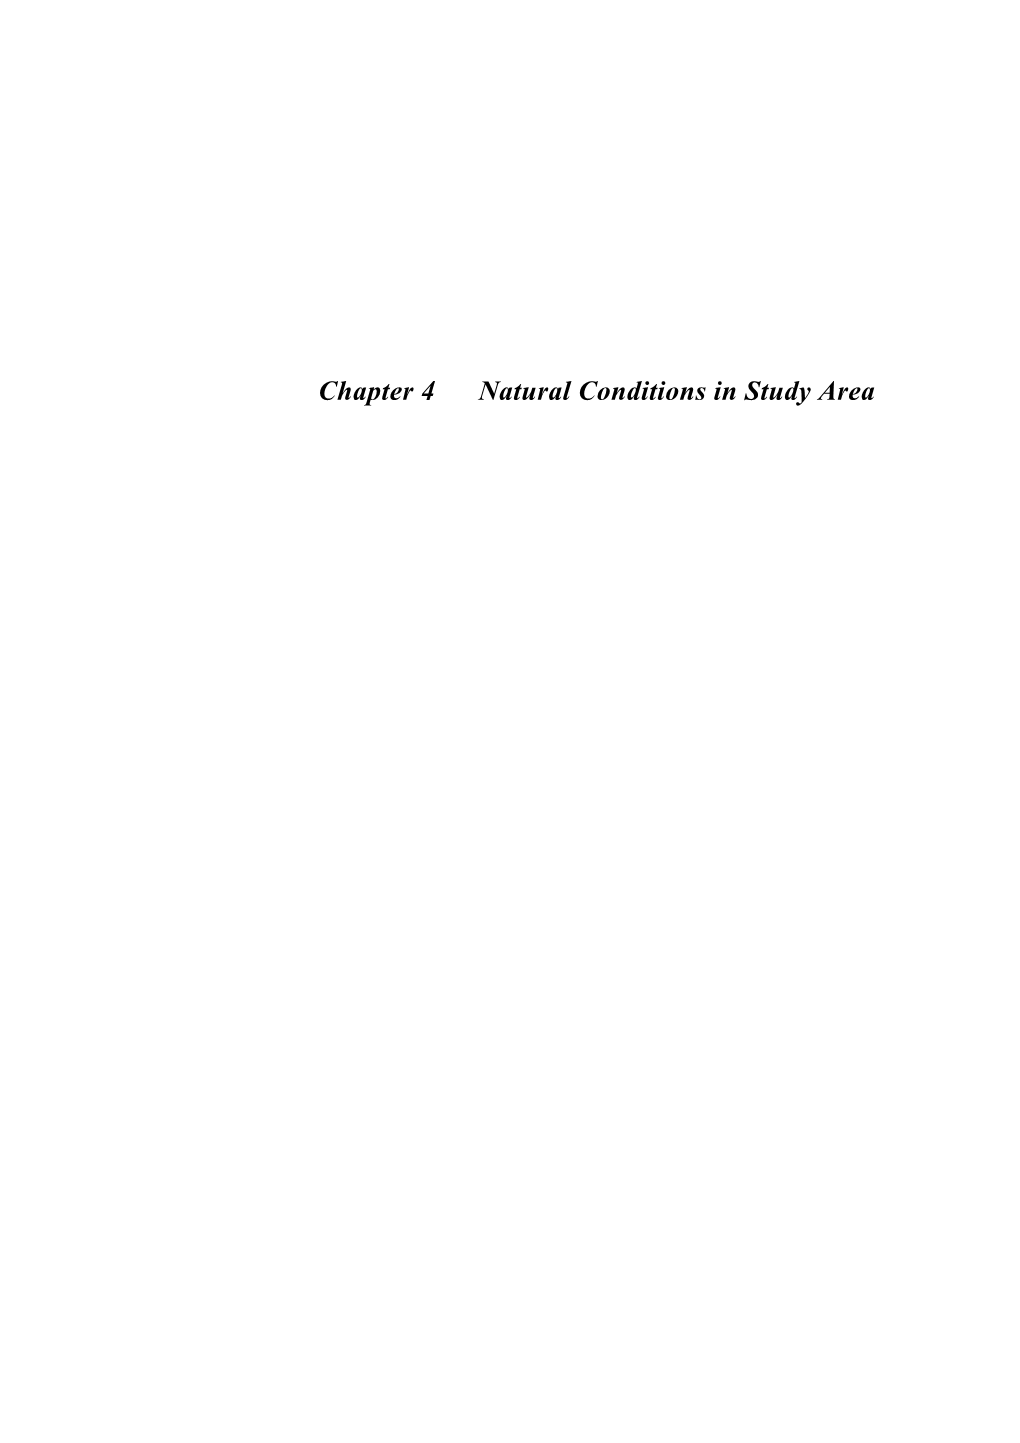 Chapter 4 Natural Conditions in Study Area